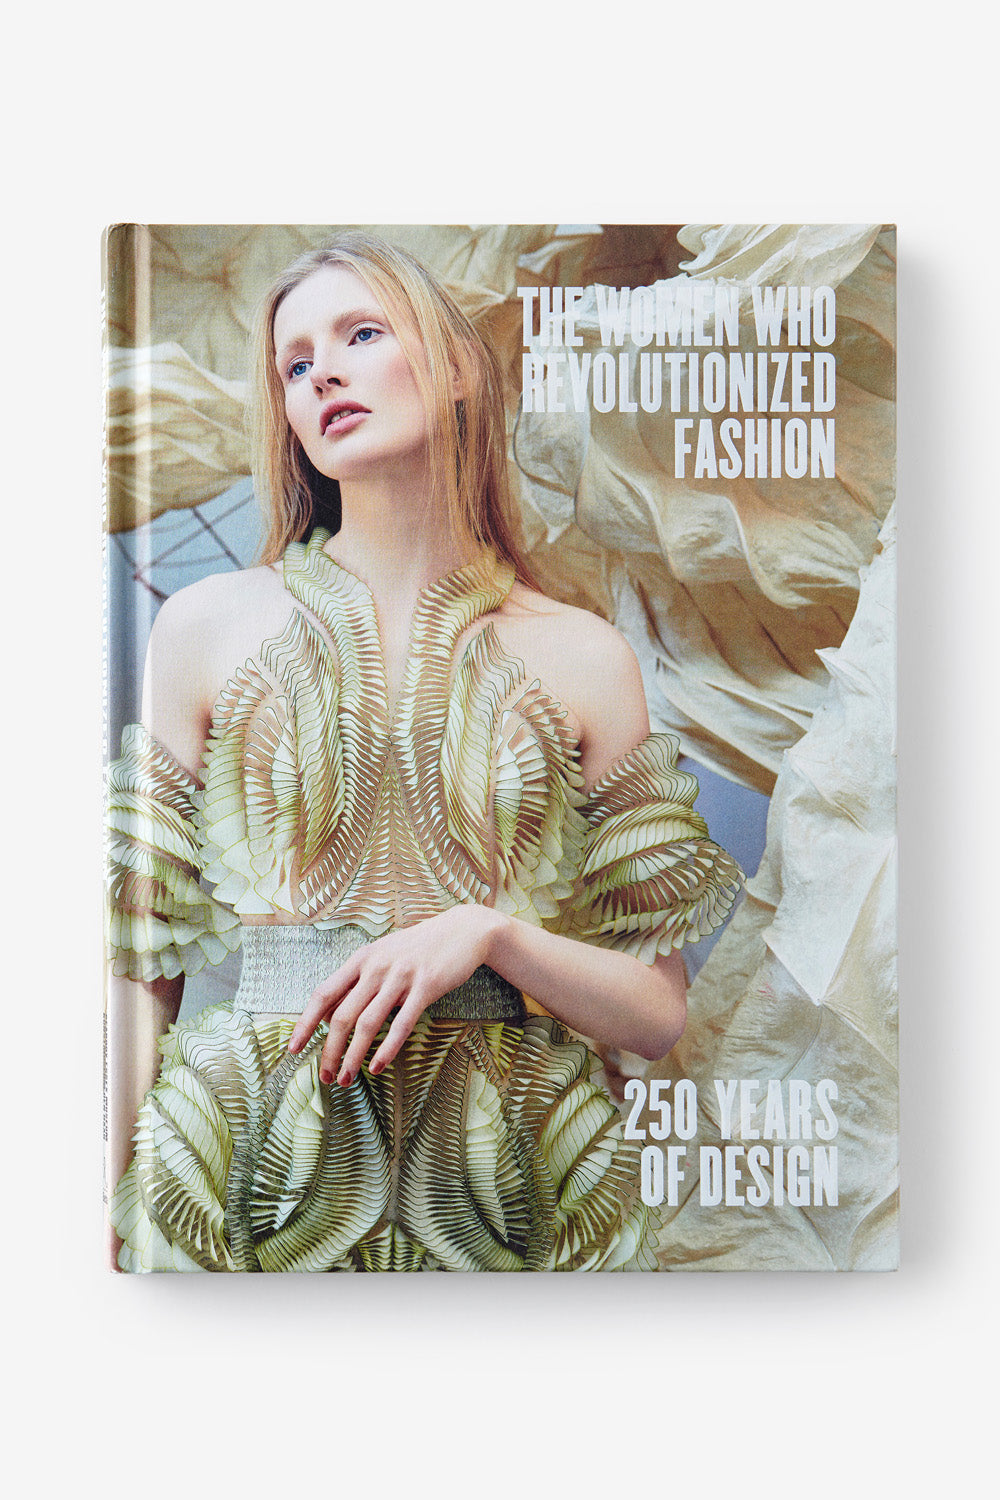 Book cover of The Women Who Revolutionized Fashion: 250 Years of Design.